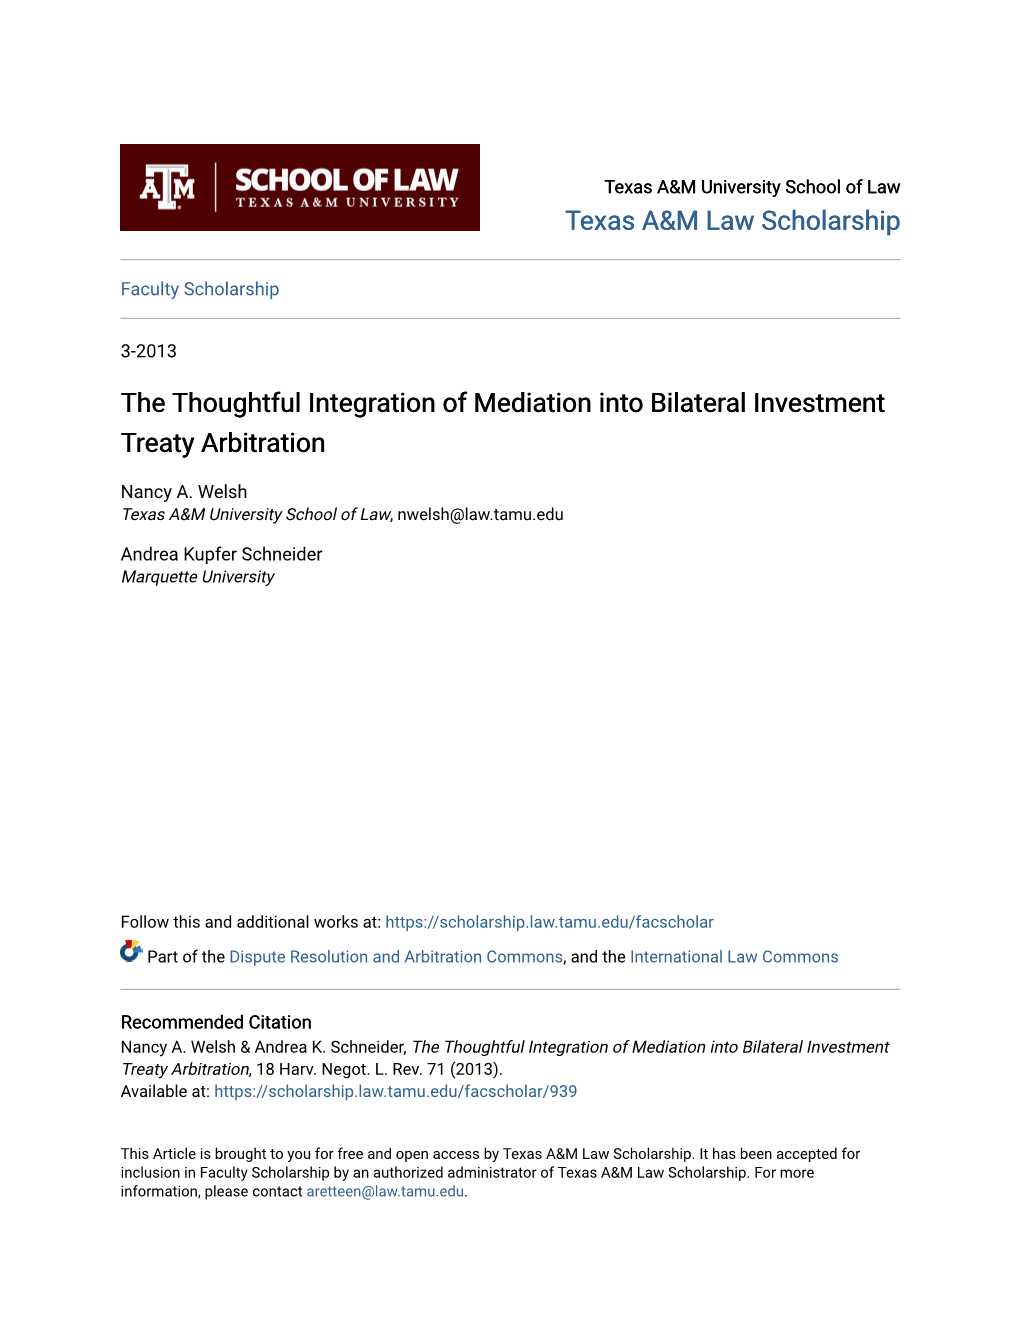 The Thoughtful Integration of Mediation Into Bilateral Investment Treaty Arbitration